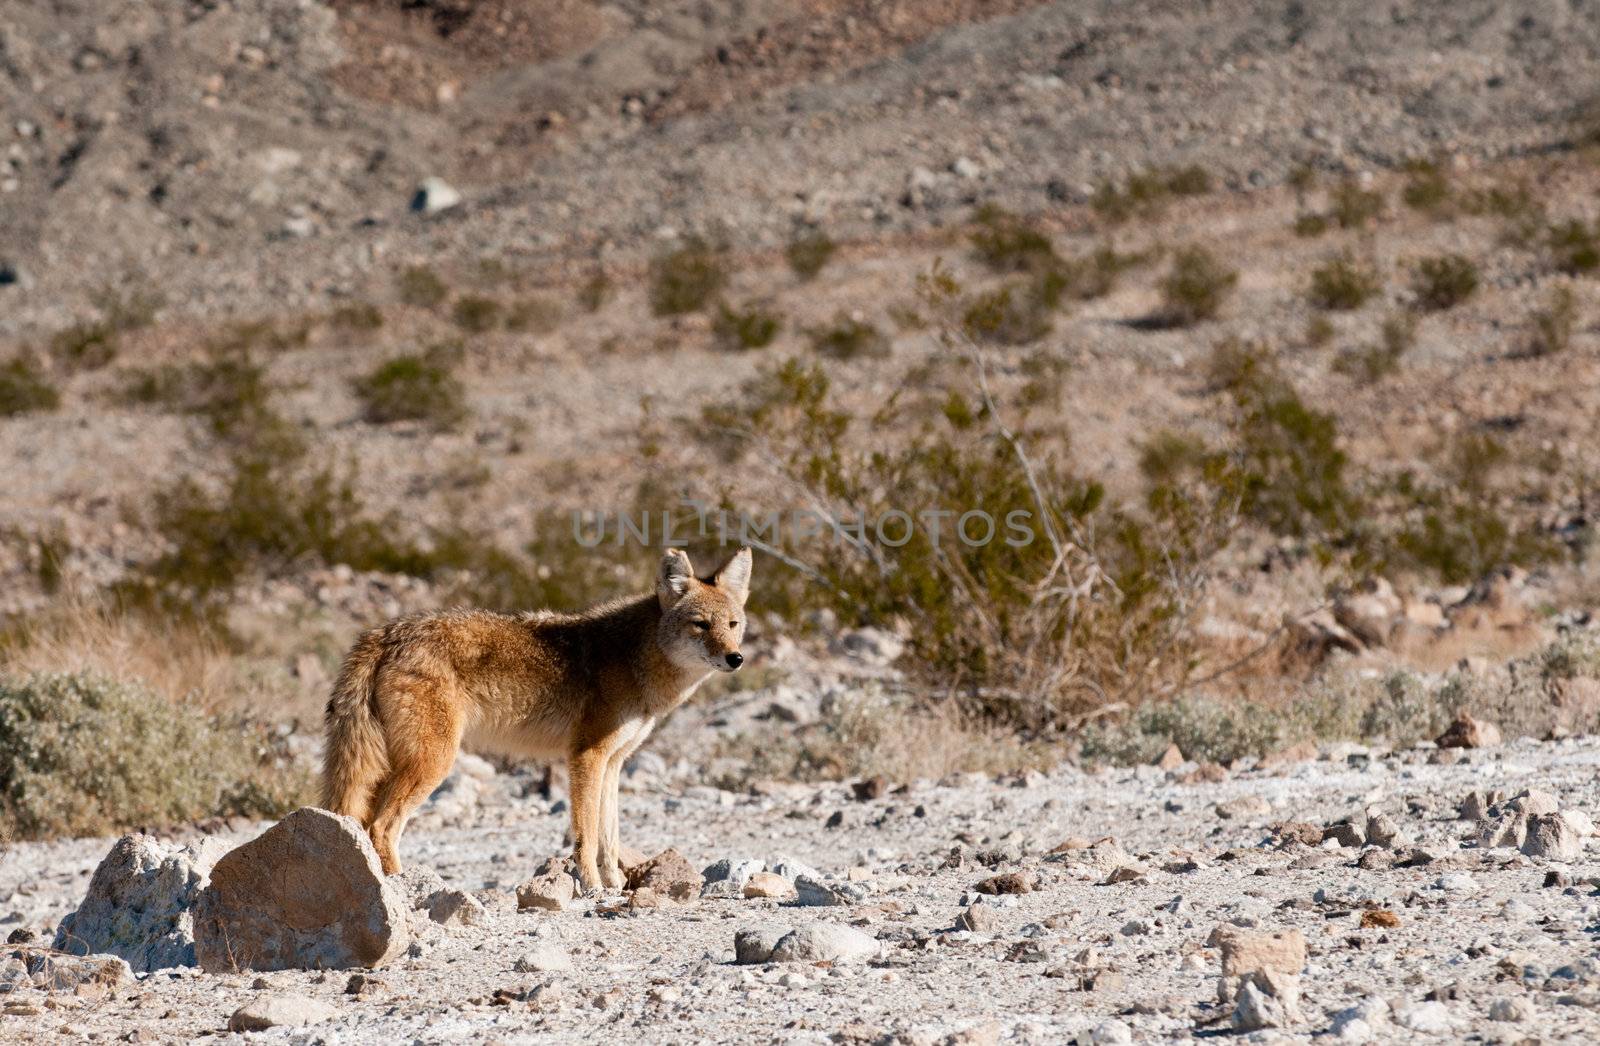 Coyotes in Death Valley by jeffbanke